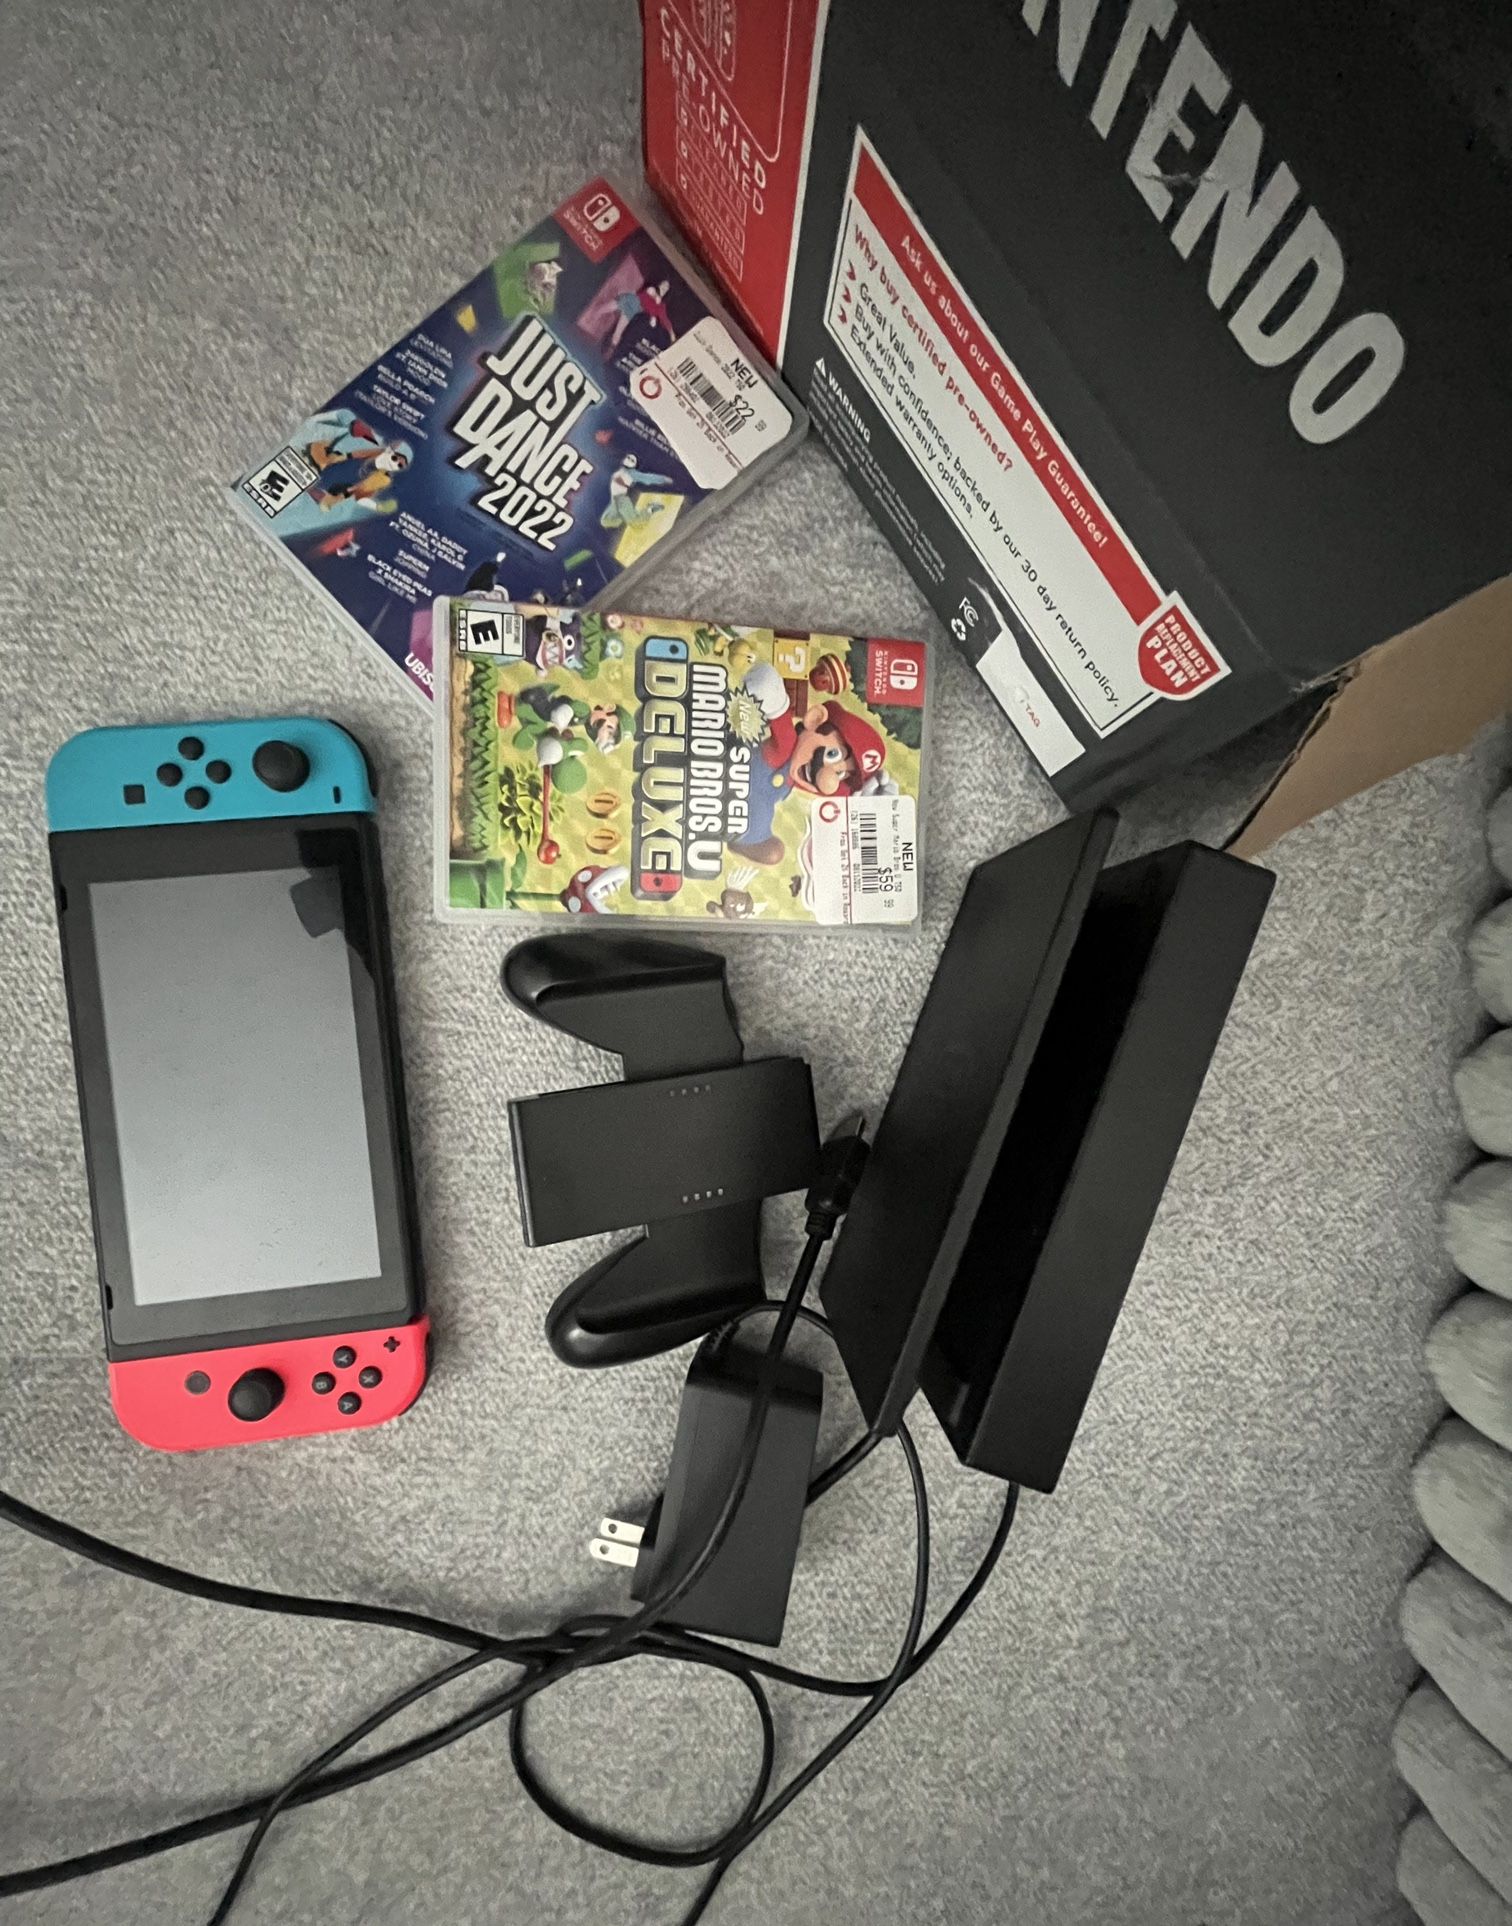 Nintendo Switch With Games 